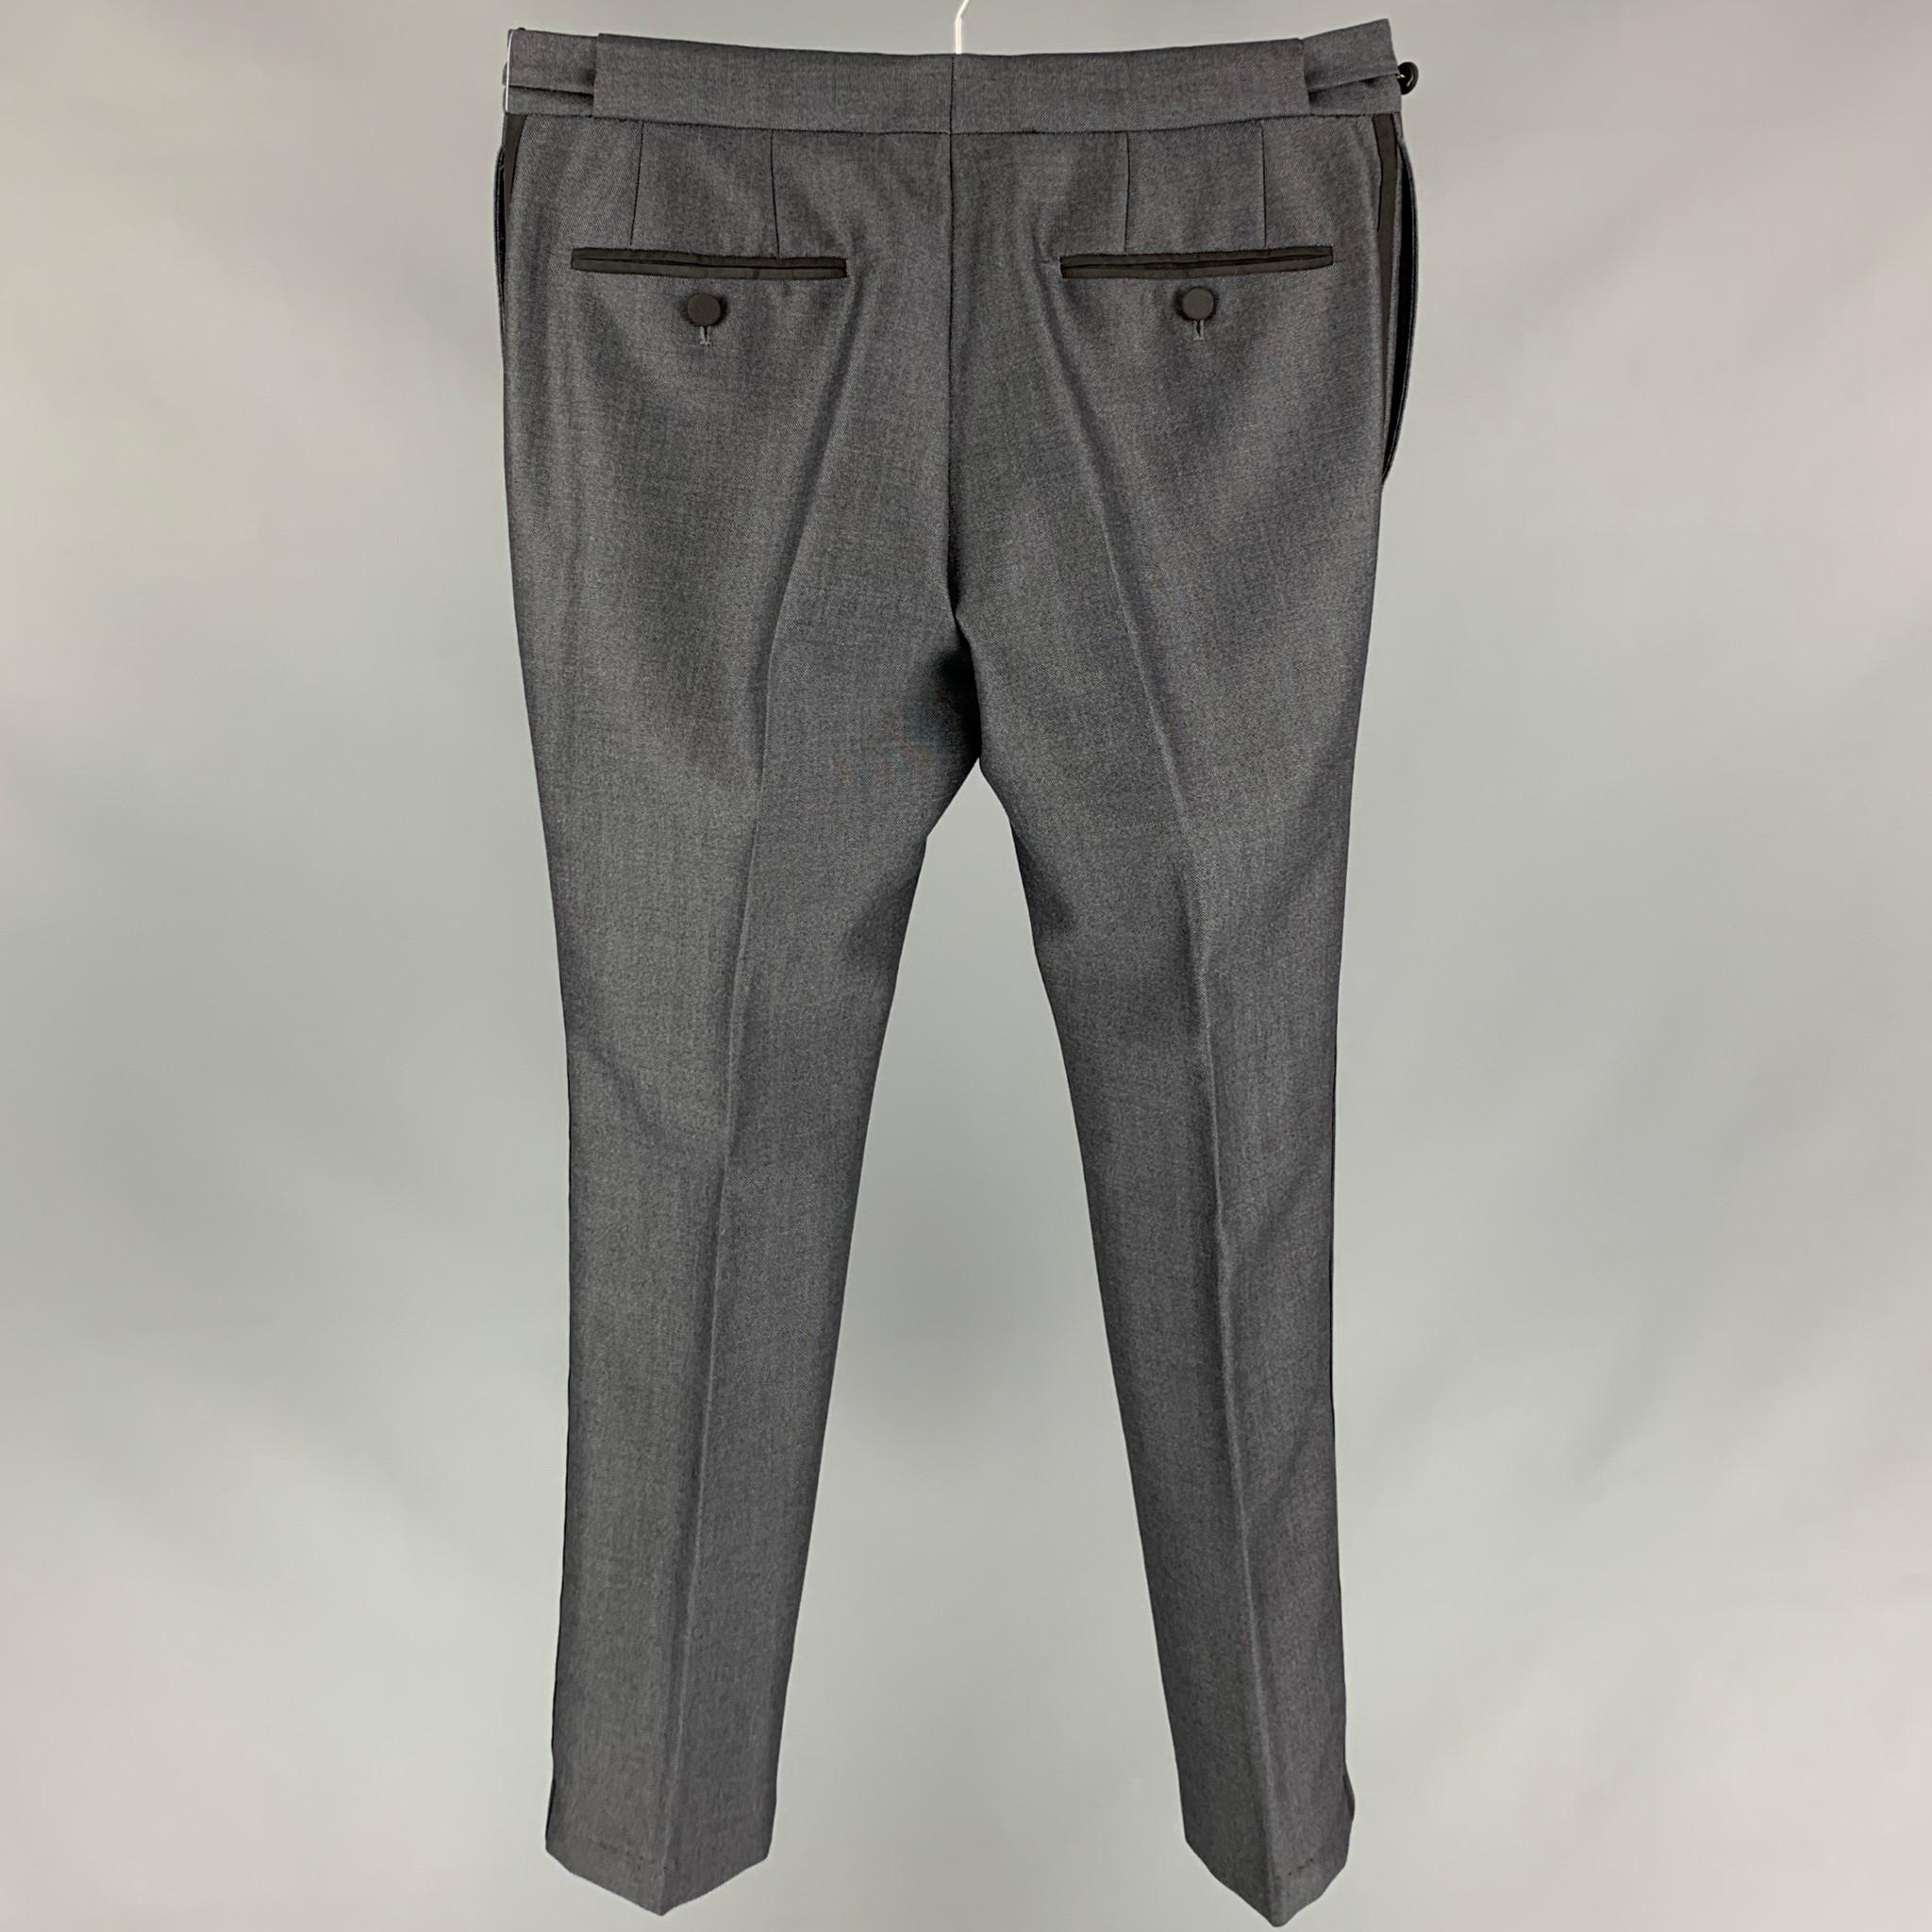 BURBERRY PRORSUM tuxedo dress pants comes in a slate grey wool with a silk stripe featuring a slim fit, side tabs, front tab, and a zip fly closure. Made in Italy. 

Very Good Pre-Owned Condition.
Marked: 48

Measurements:

Waist: 32 in.
Rise: 10